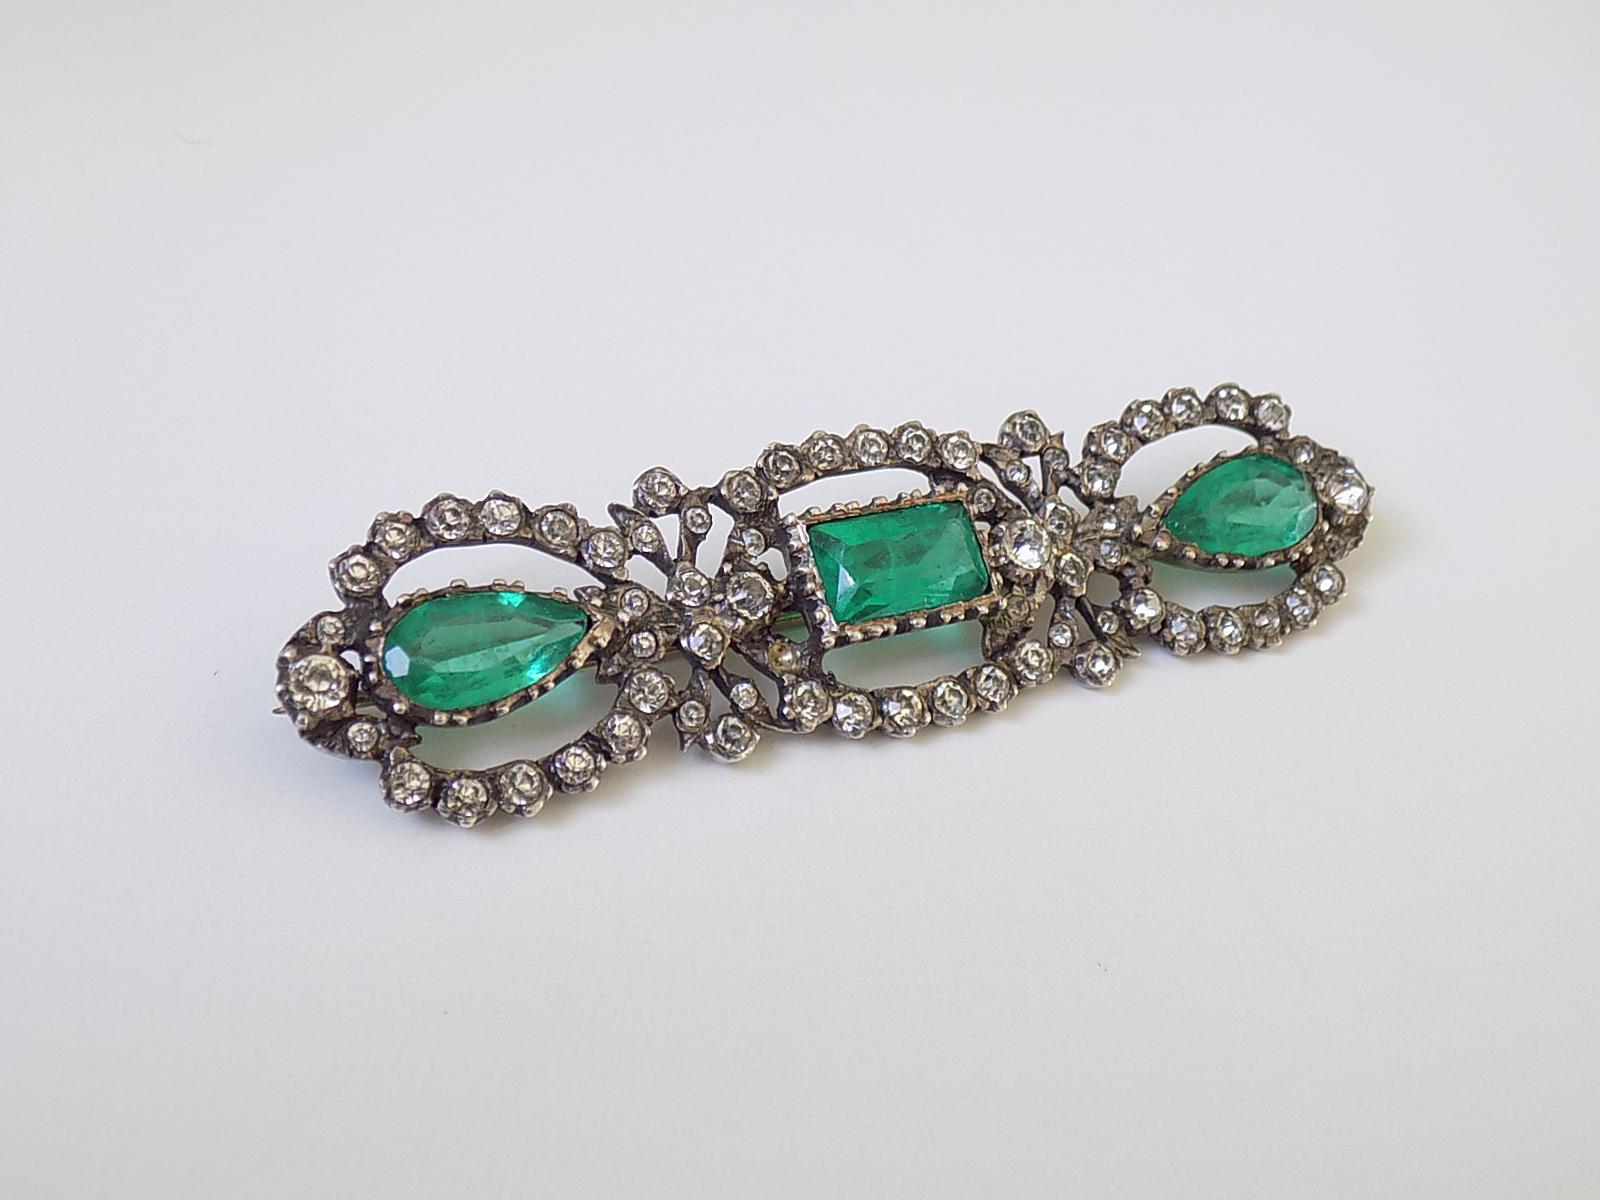 This is a spectacular Edwardian period Emerald paste & Diamond Lazarus paste (glass) brooch in solid Sterling silver mount. The brooch made in Georgian style. British origin. 
Lazarus paste was founded by British maker Harold A. Lazarus in 1900. Who